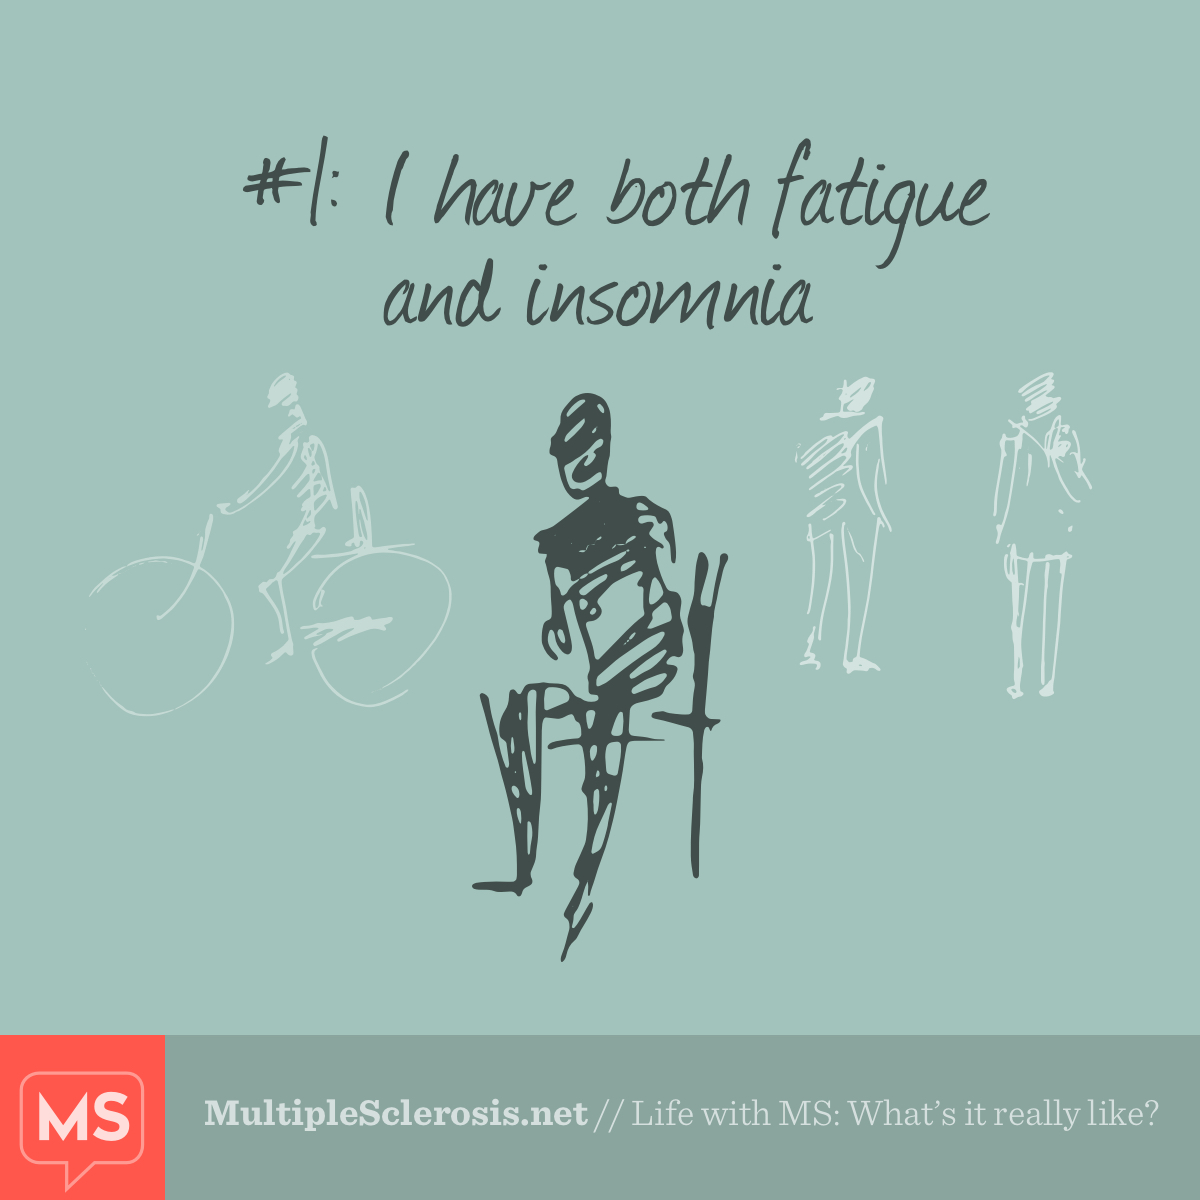 Life with MS: What’s it really like?